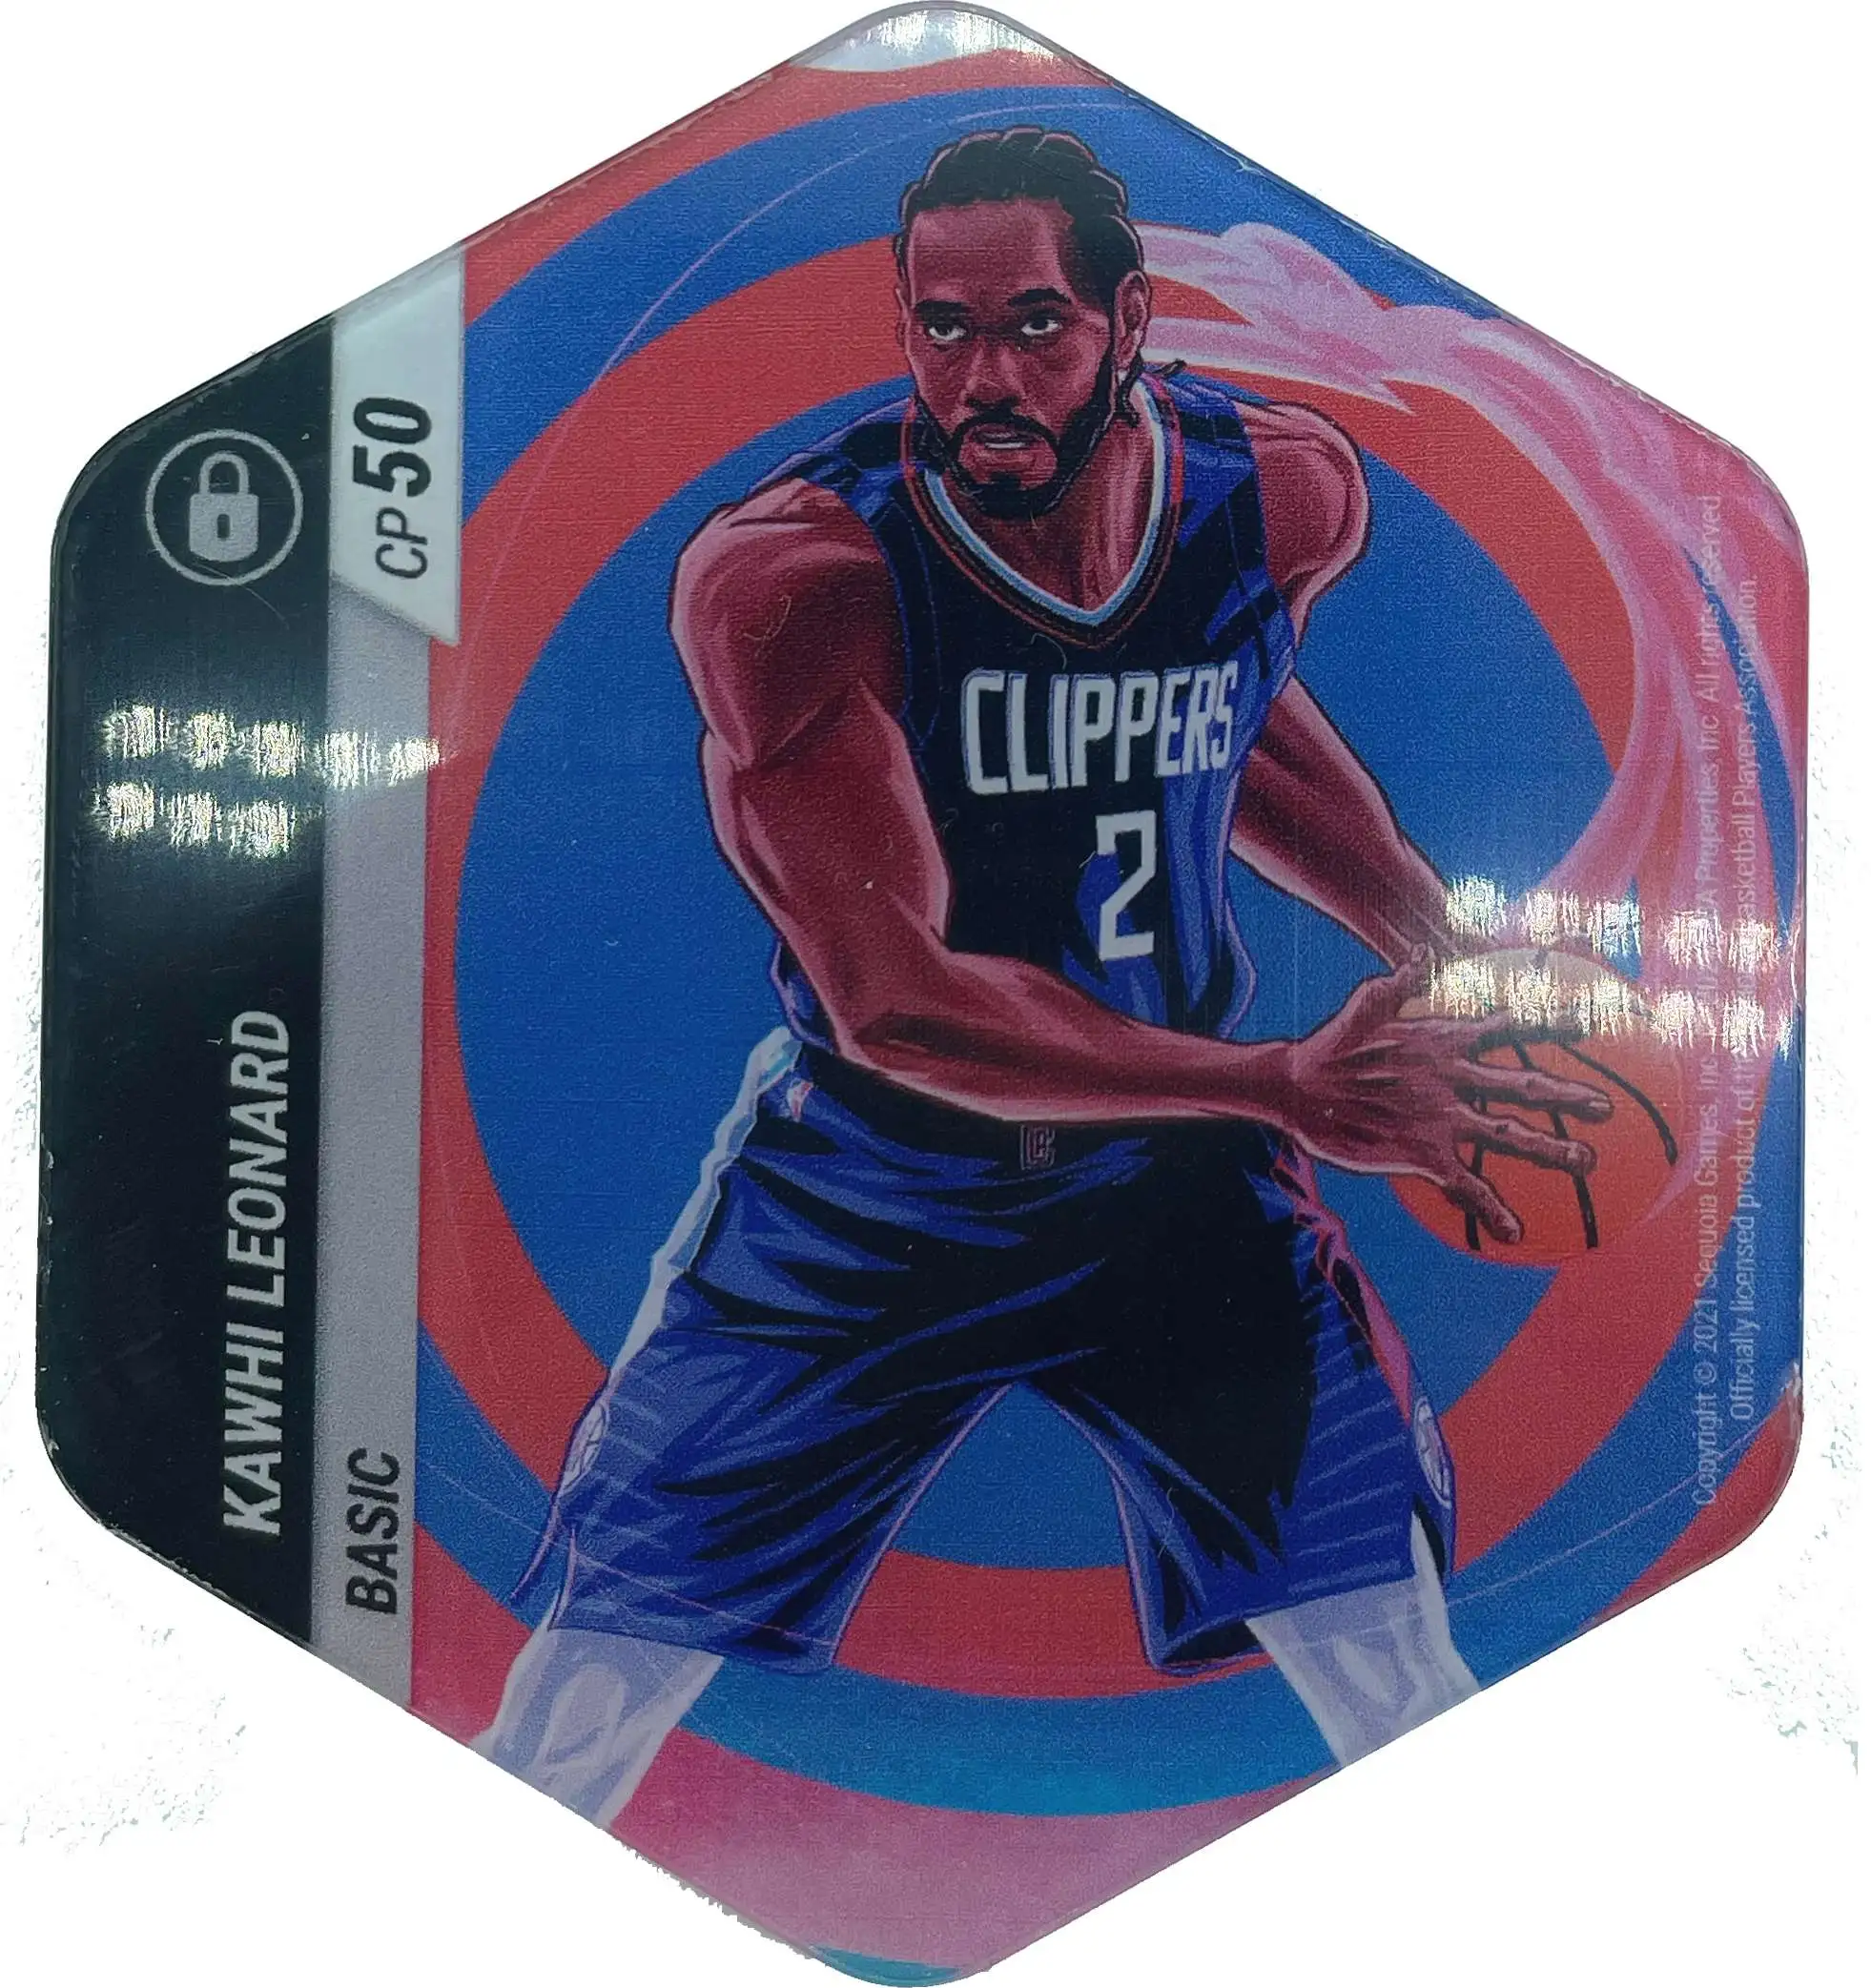 Kawhi Leonard Los Angeles Clippers Decal 11" x 17" Stickers 